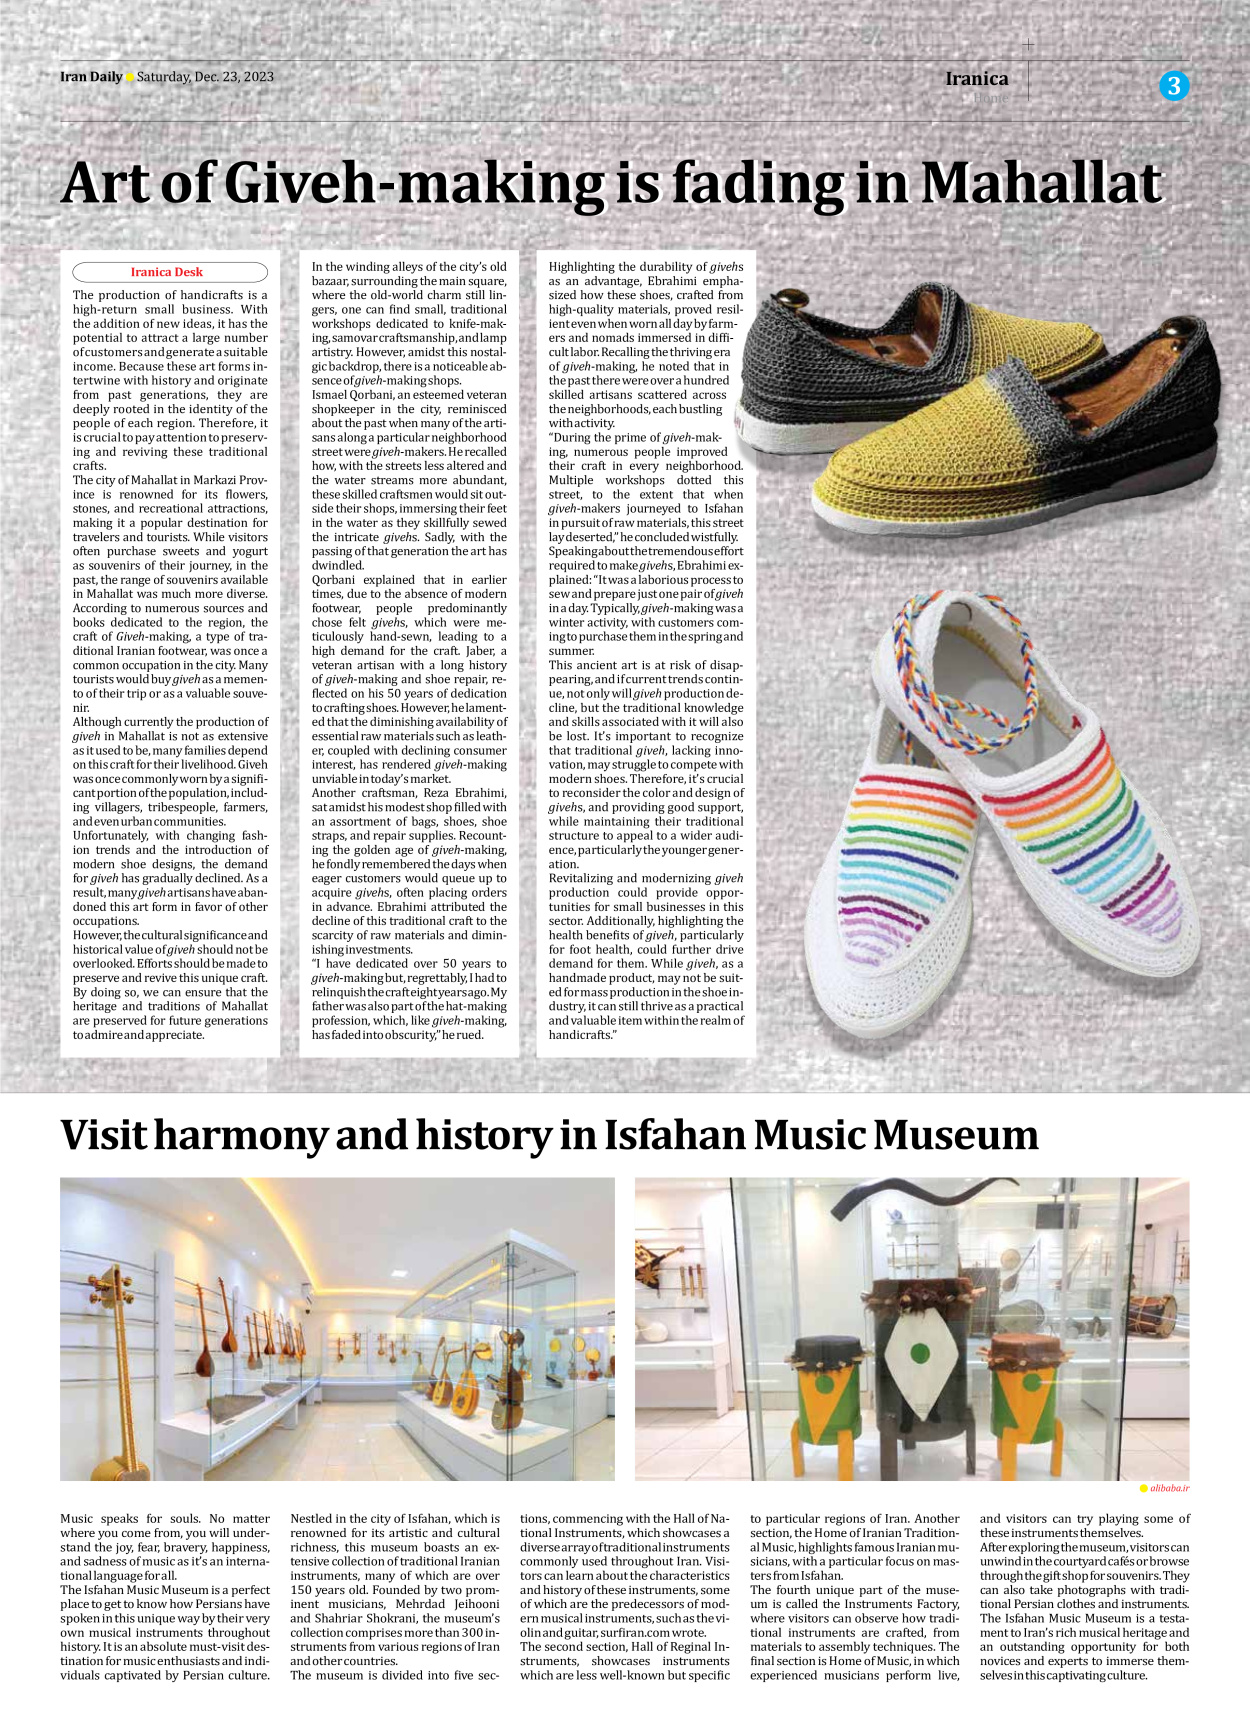 Iran Daily - Number Seven Thousand Four Hundred and Sixty Five - 23 December 2023 - Page 3